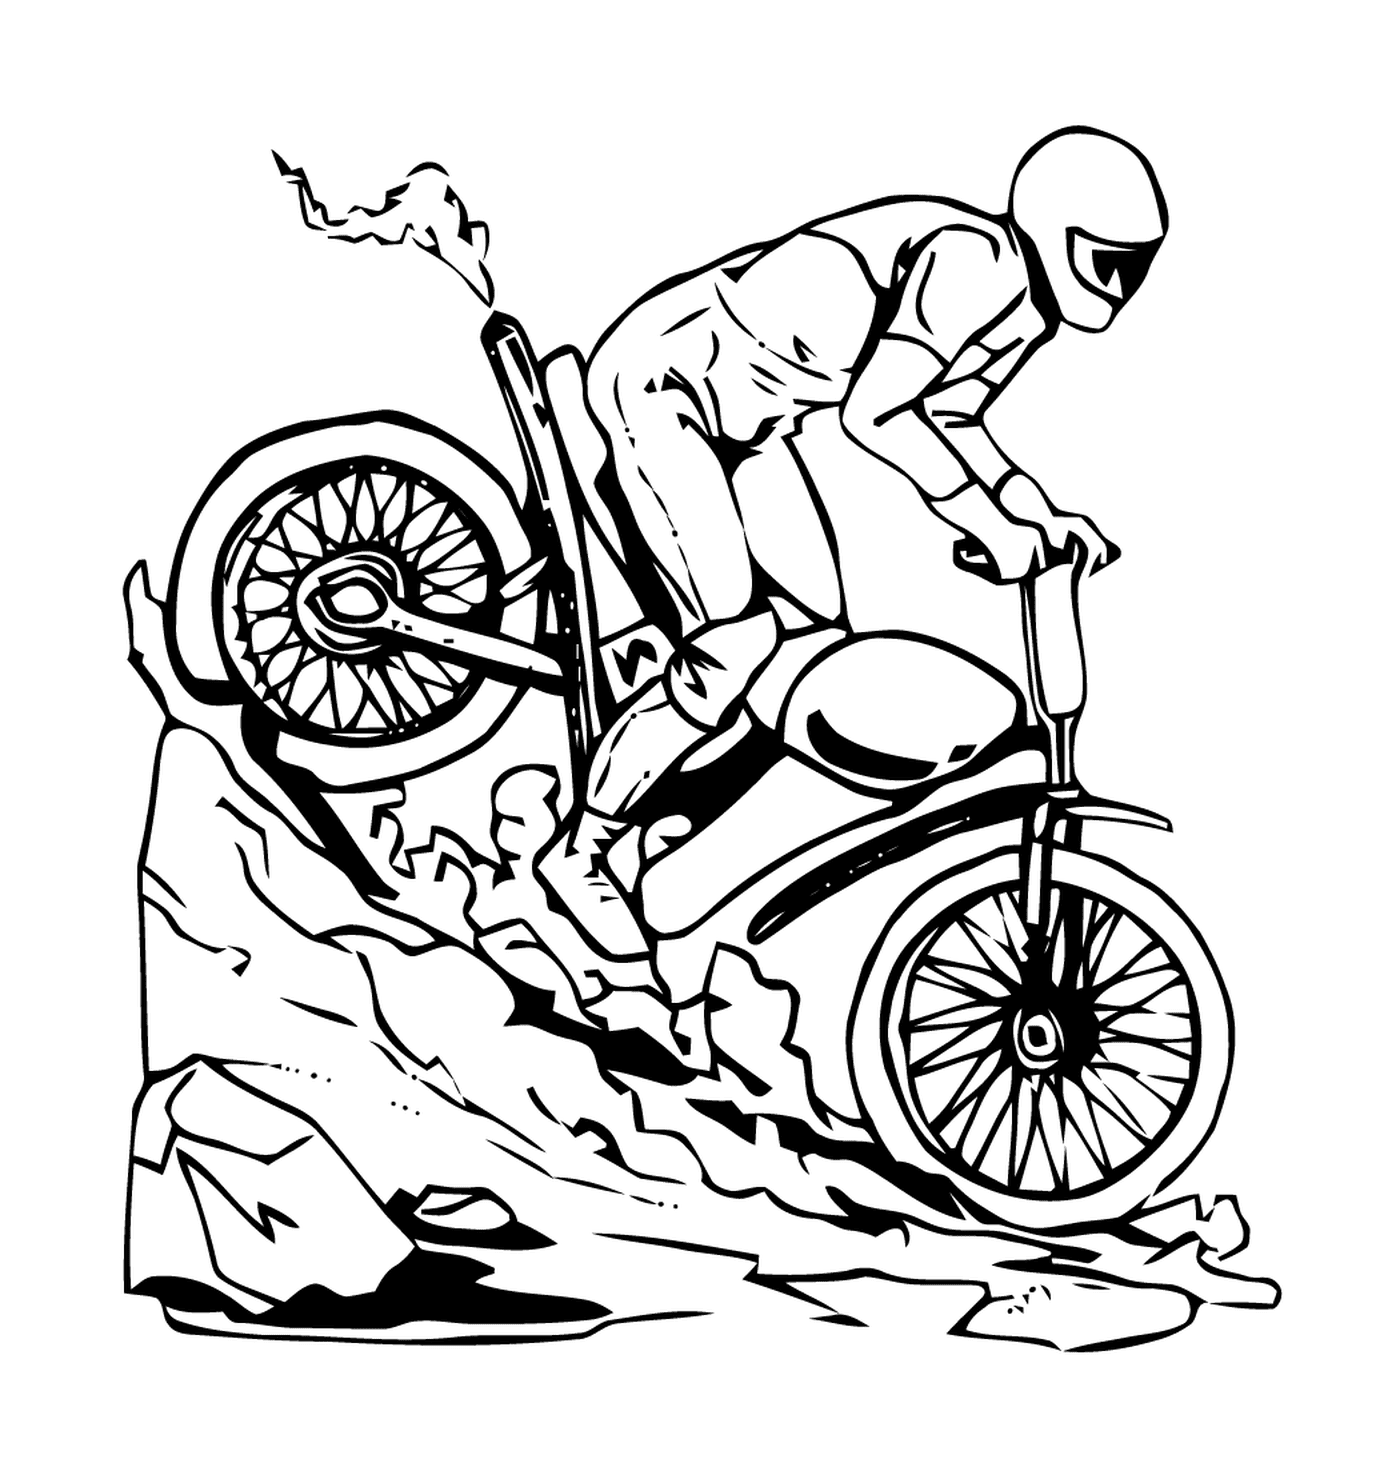  Male on a bike going down a hill 